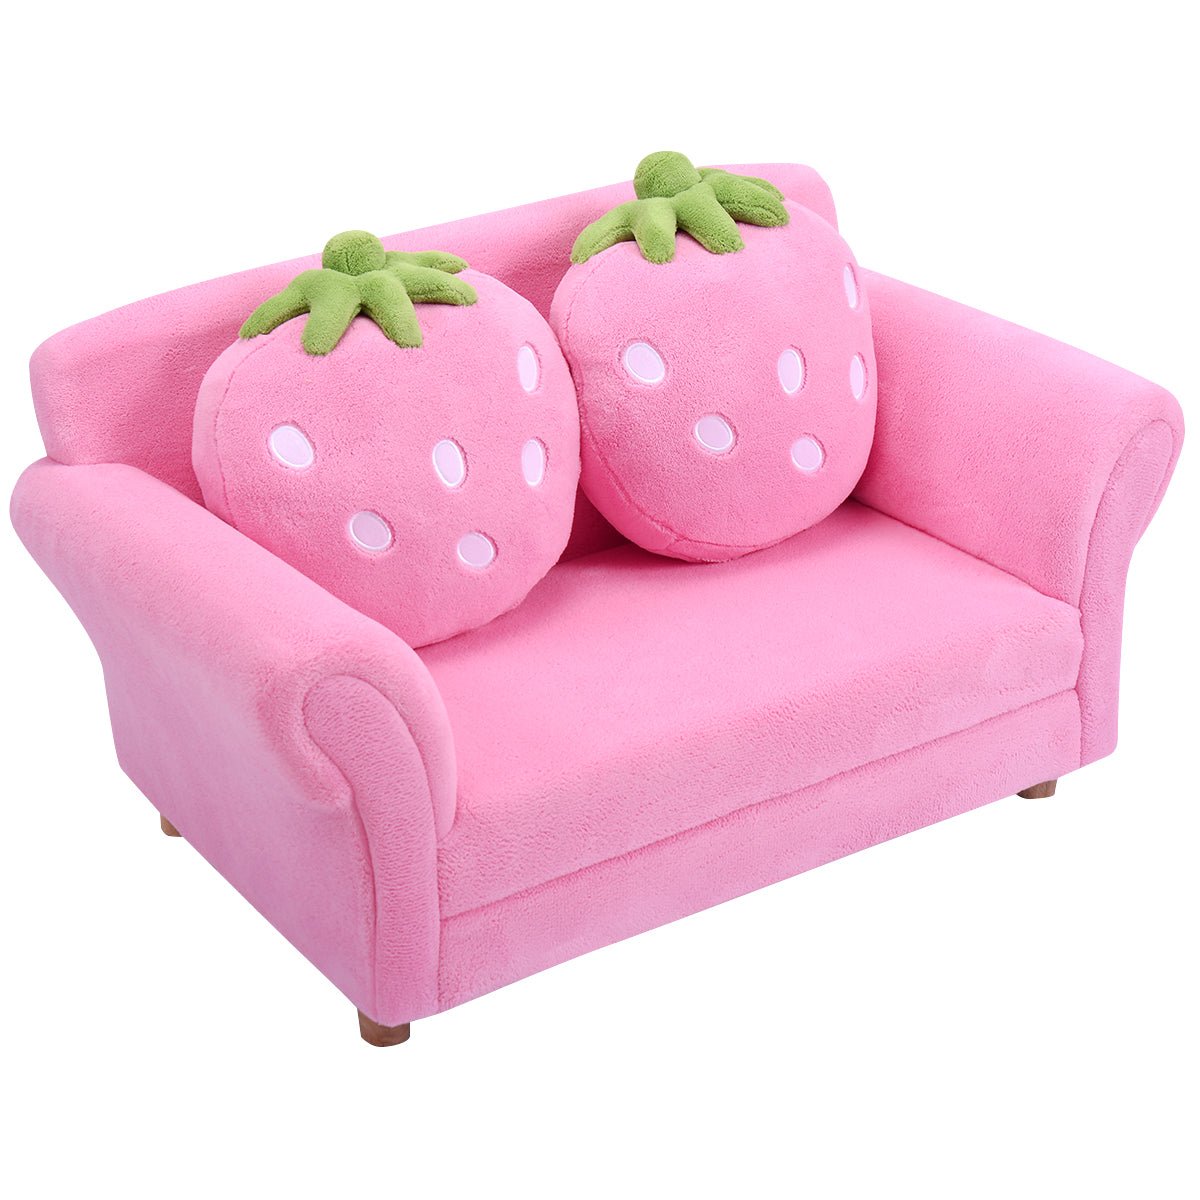 Kids Lounge Bed: 2-Seat Sofa with Strawberry Pillows for Relaxation